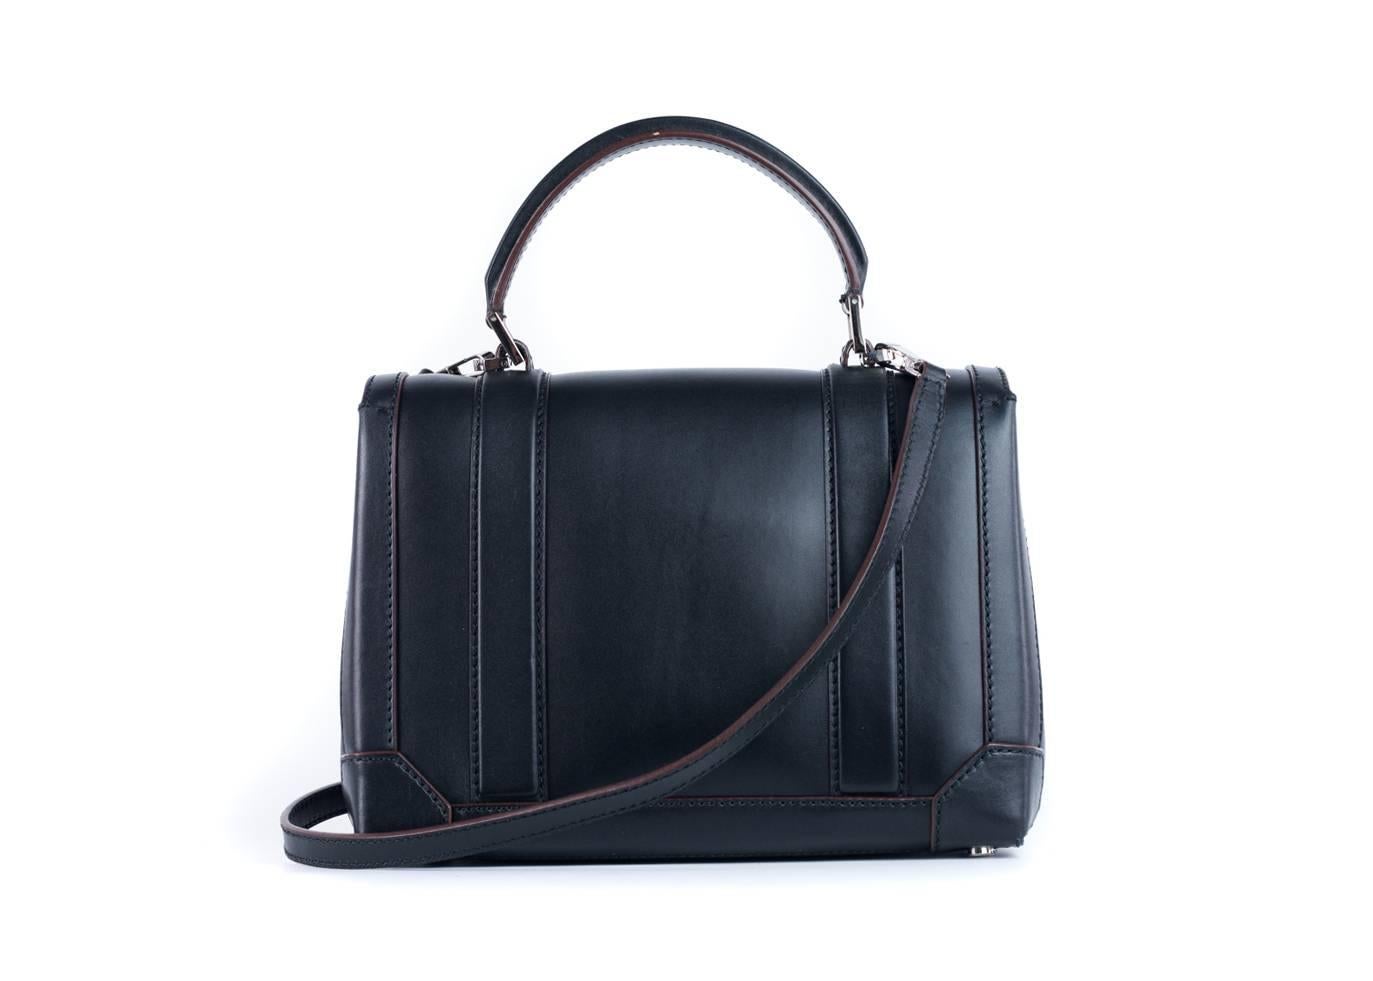 Roberto Cavalli Womens Solid Black Leather Satchel Shoulder Bag In New Condition For Sale In Brooklyn, NY